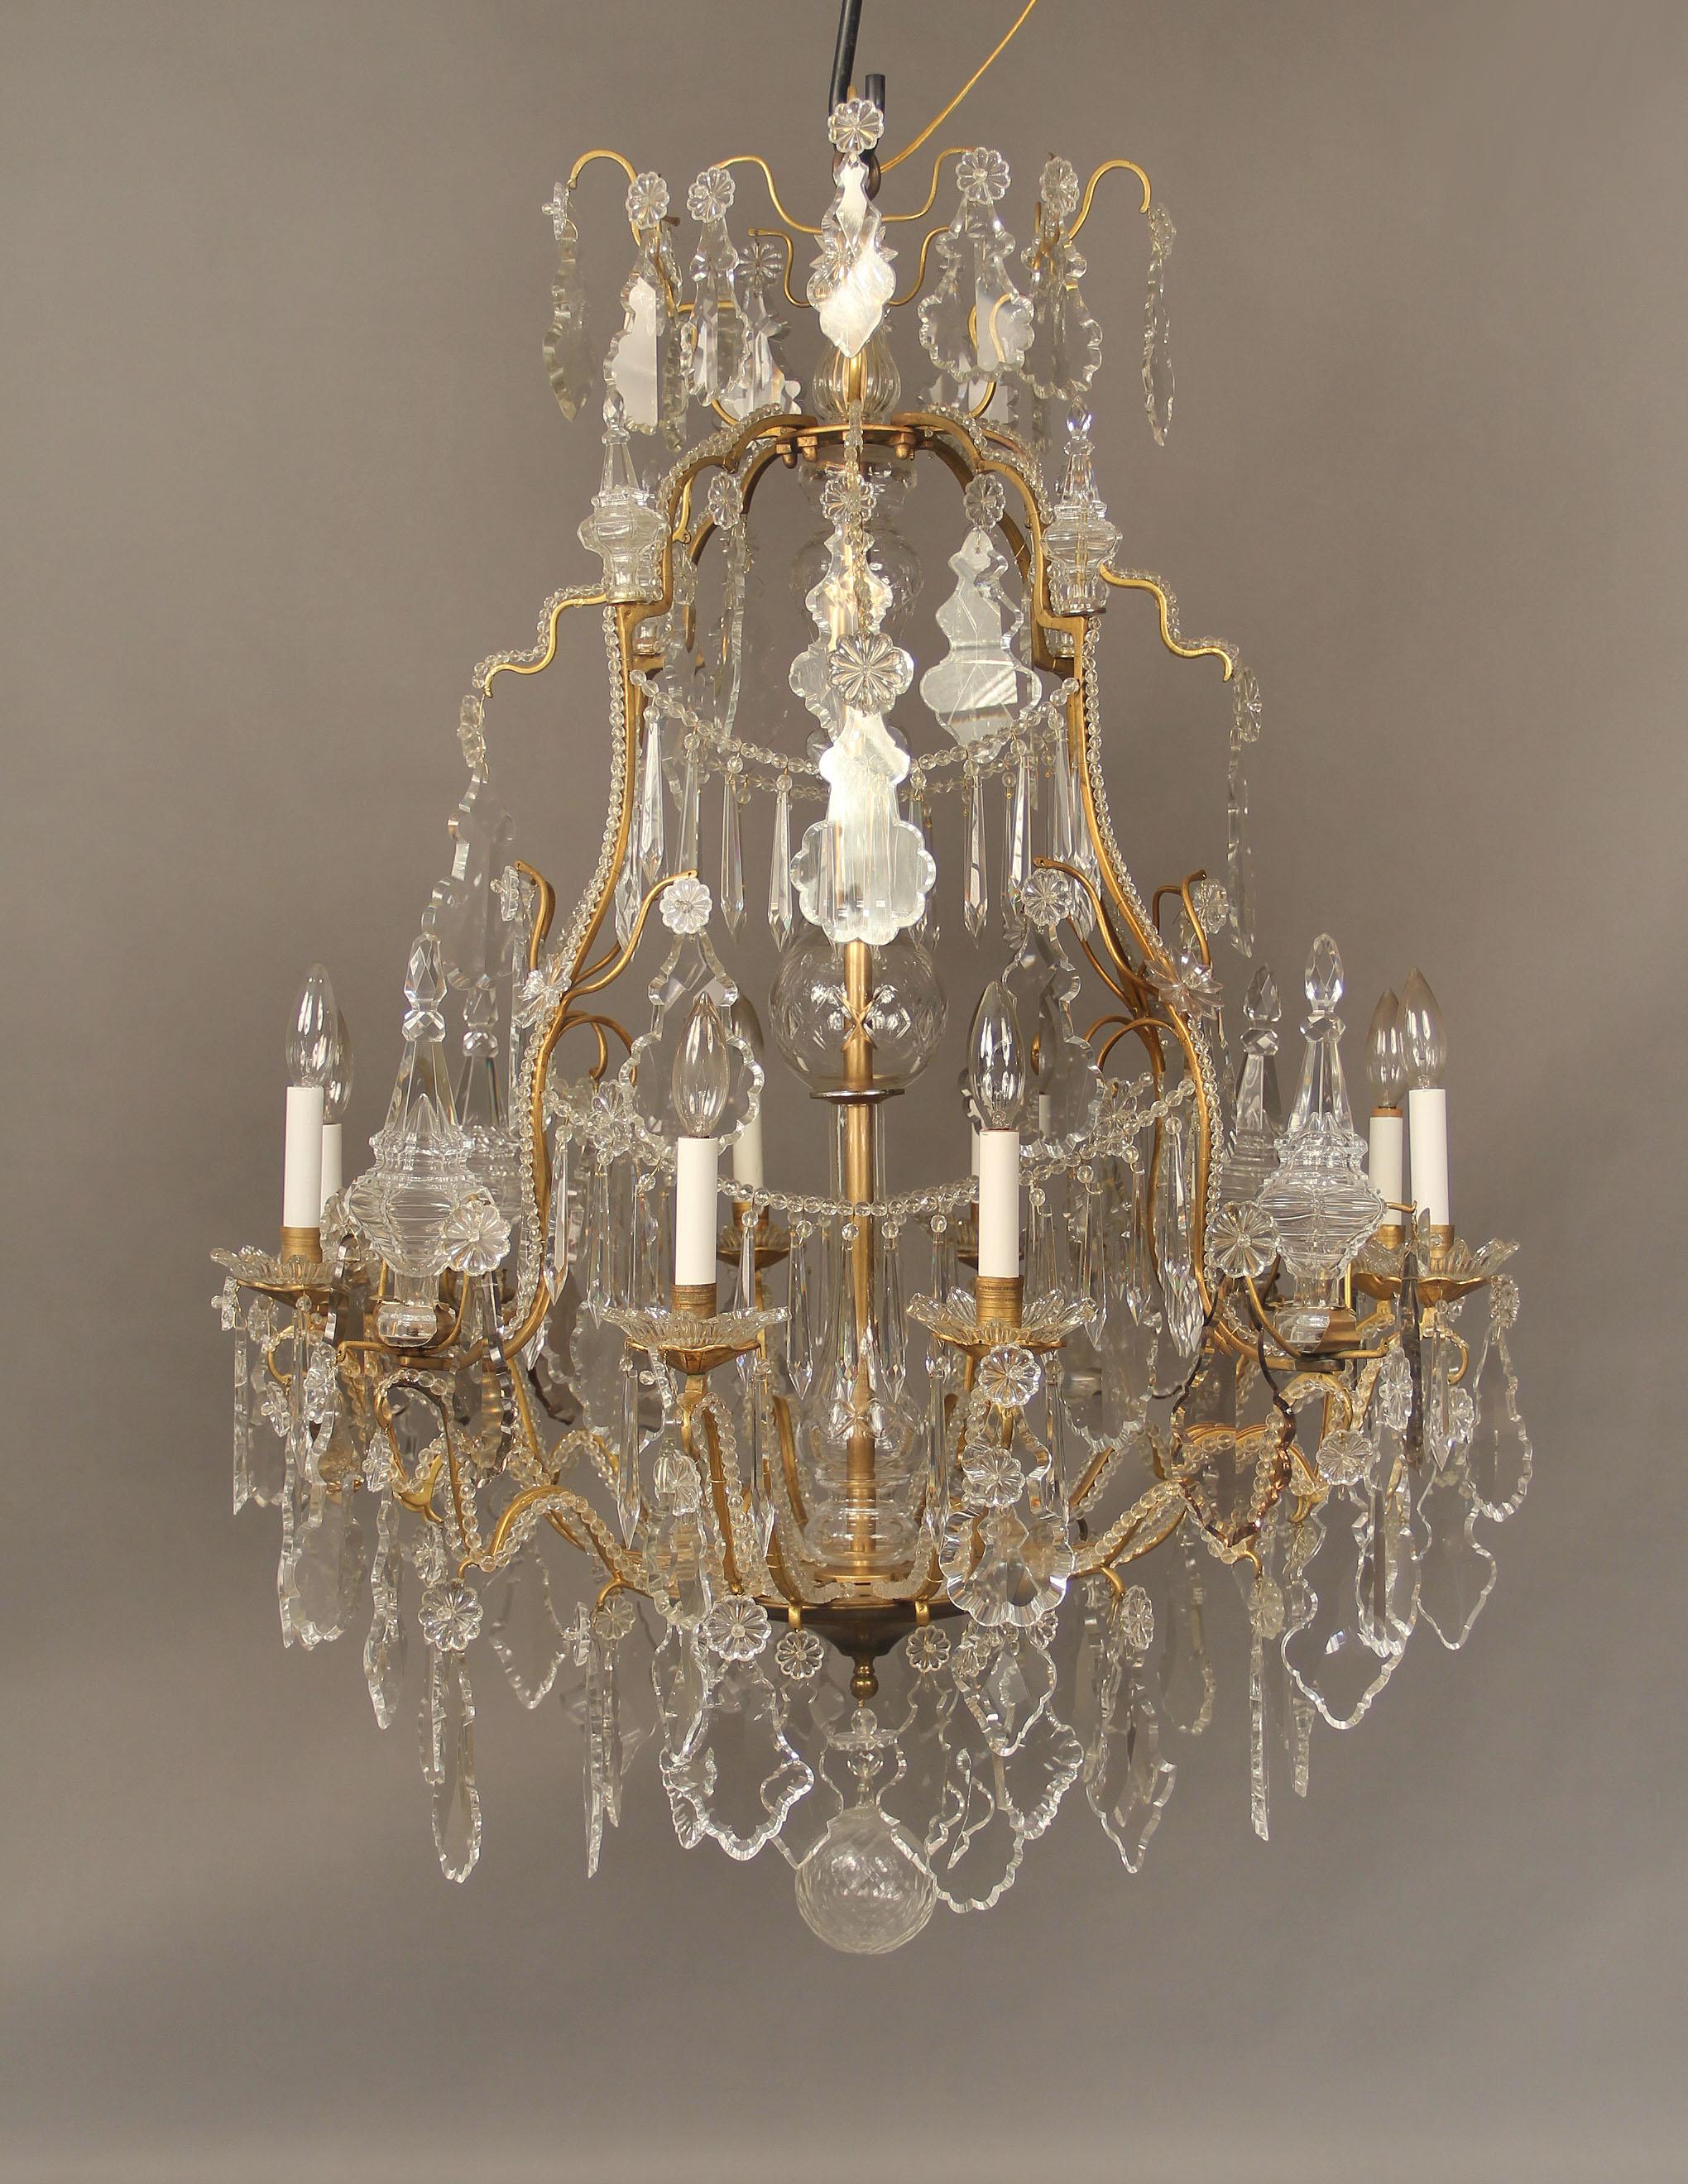 A very fine late 19th century gilt bronze and crystal eight light chandelier.

Multifaceted and shaped crystal, cut crystal central column, beaded frame and drop crystal swags. Eight-tiered spears and eight perimeter lights with bobeche